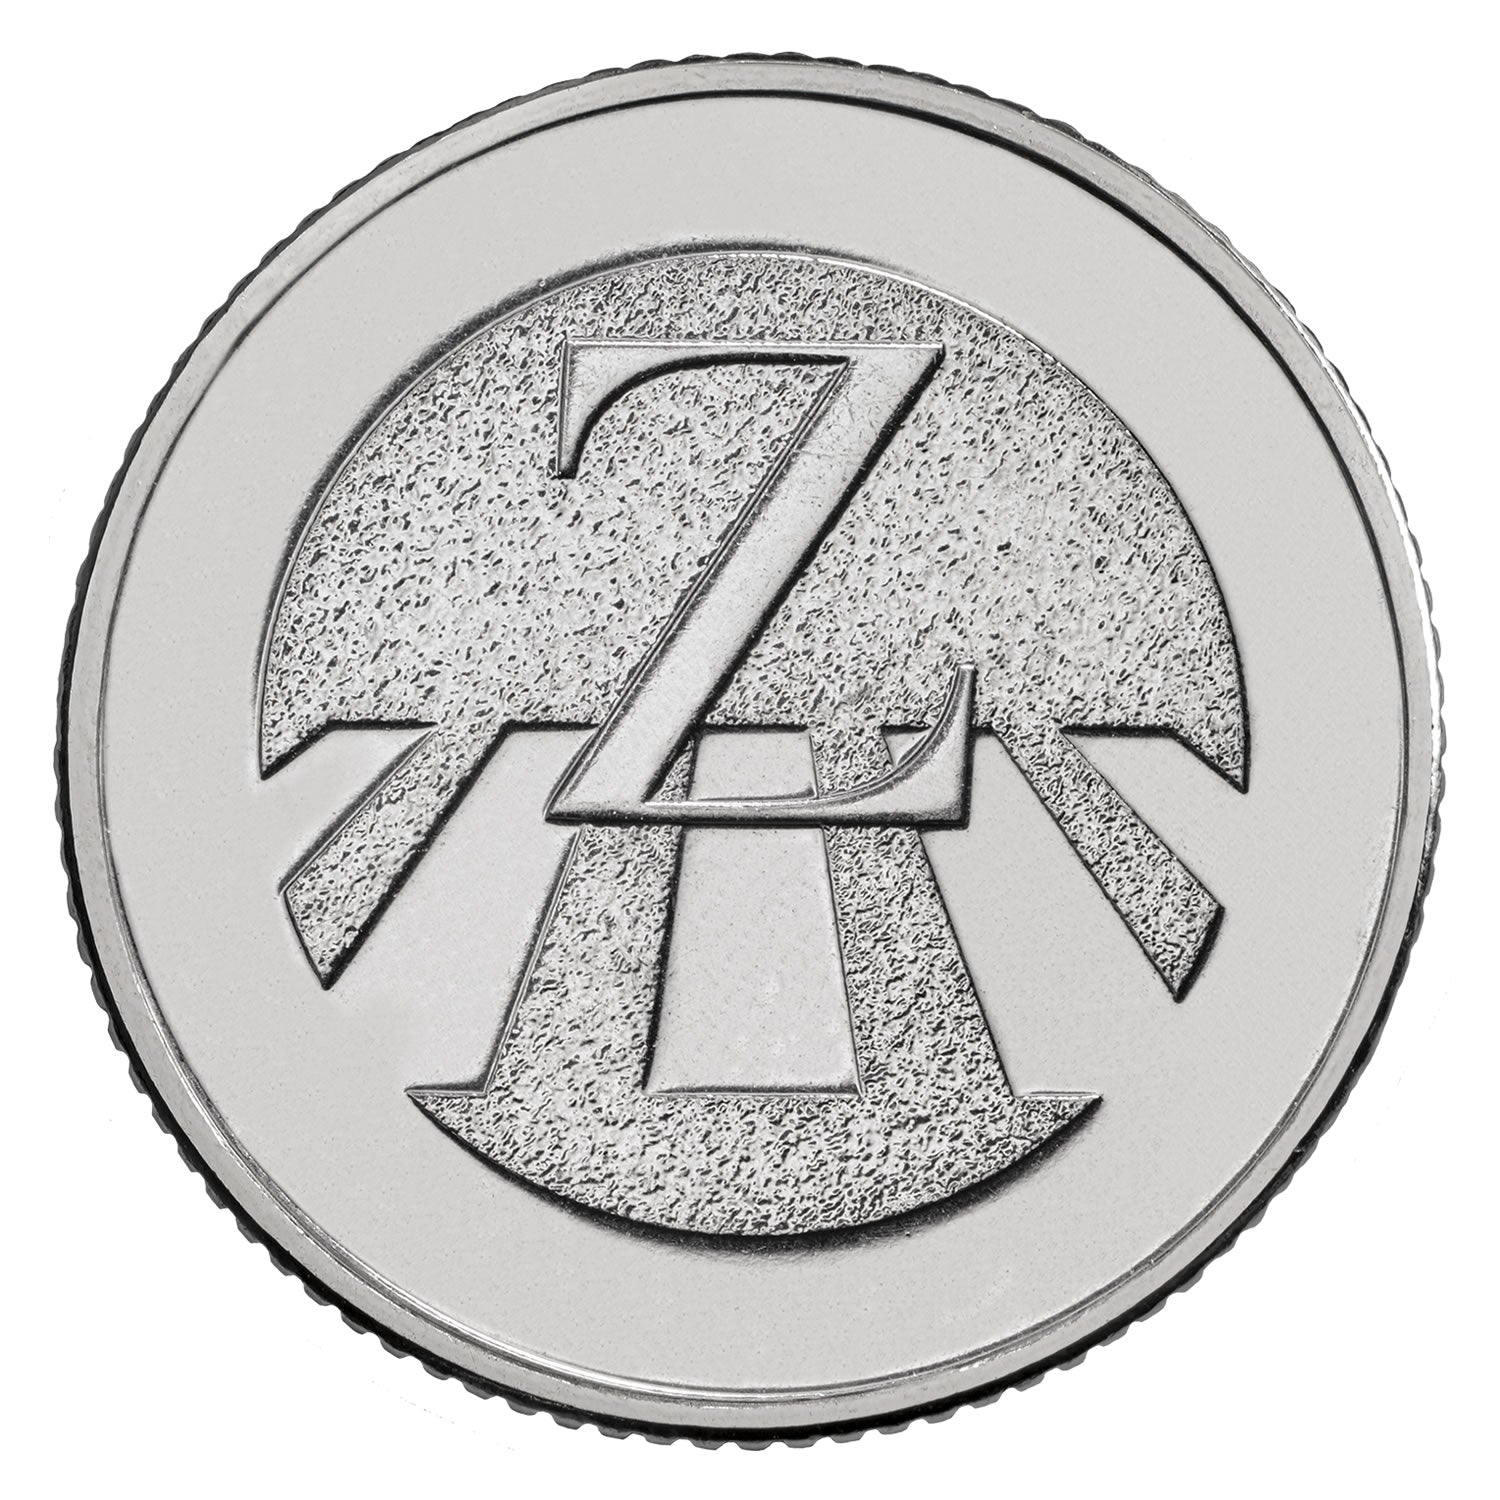 a 2019 10p coin for the letter Z